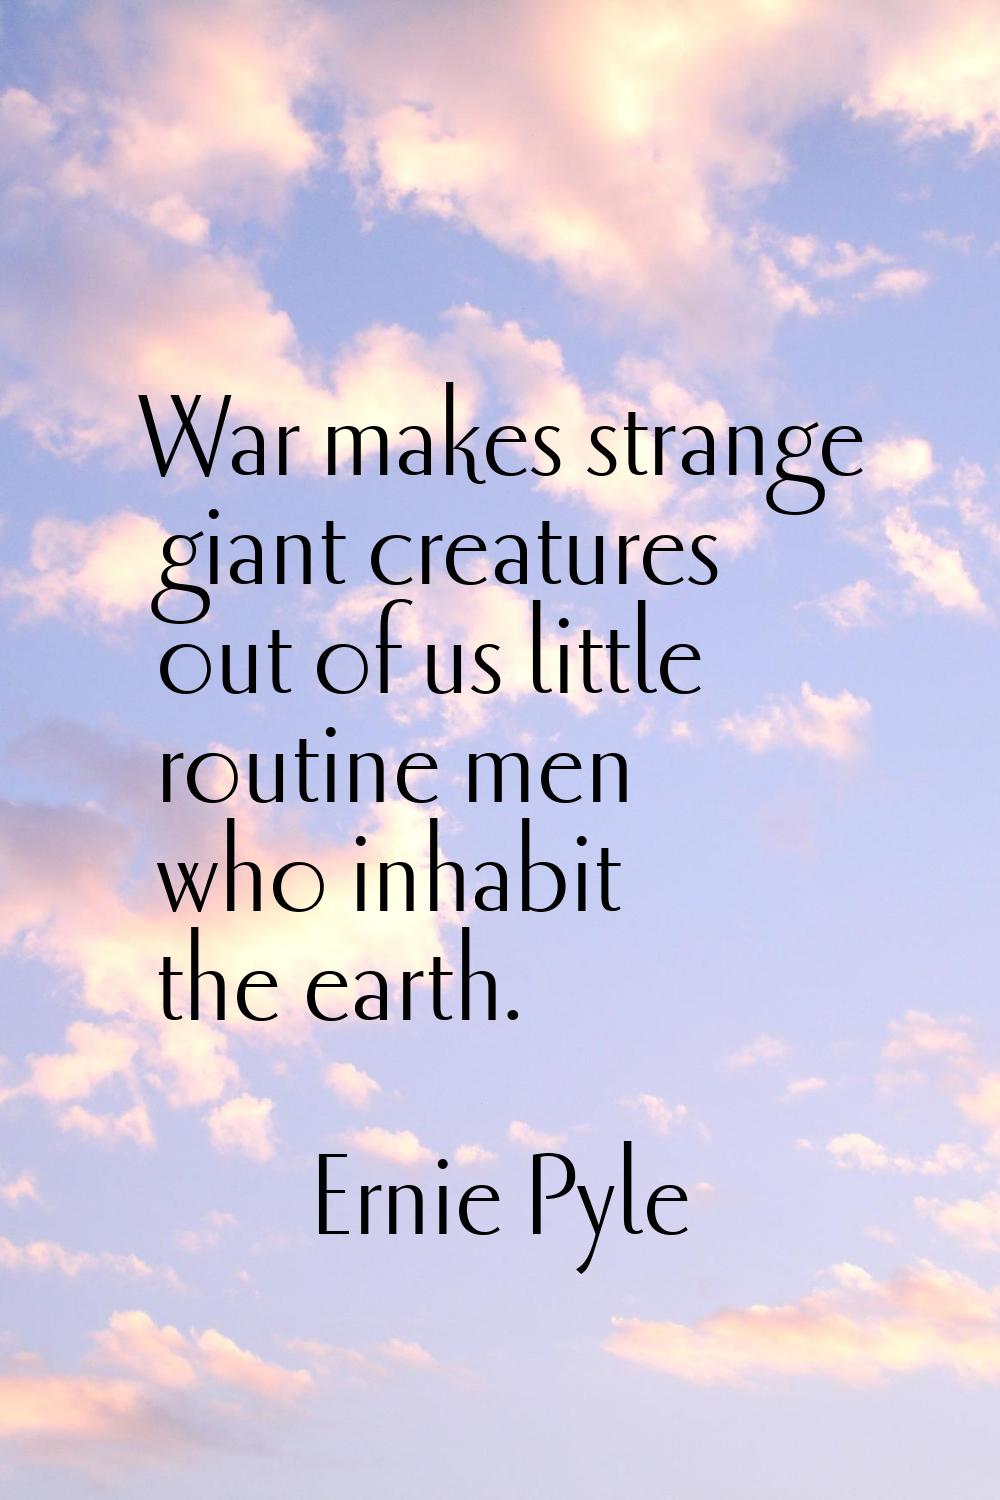 War makes strange giant creatures out of us little routine men who inhabit the earth.